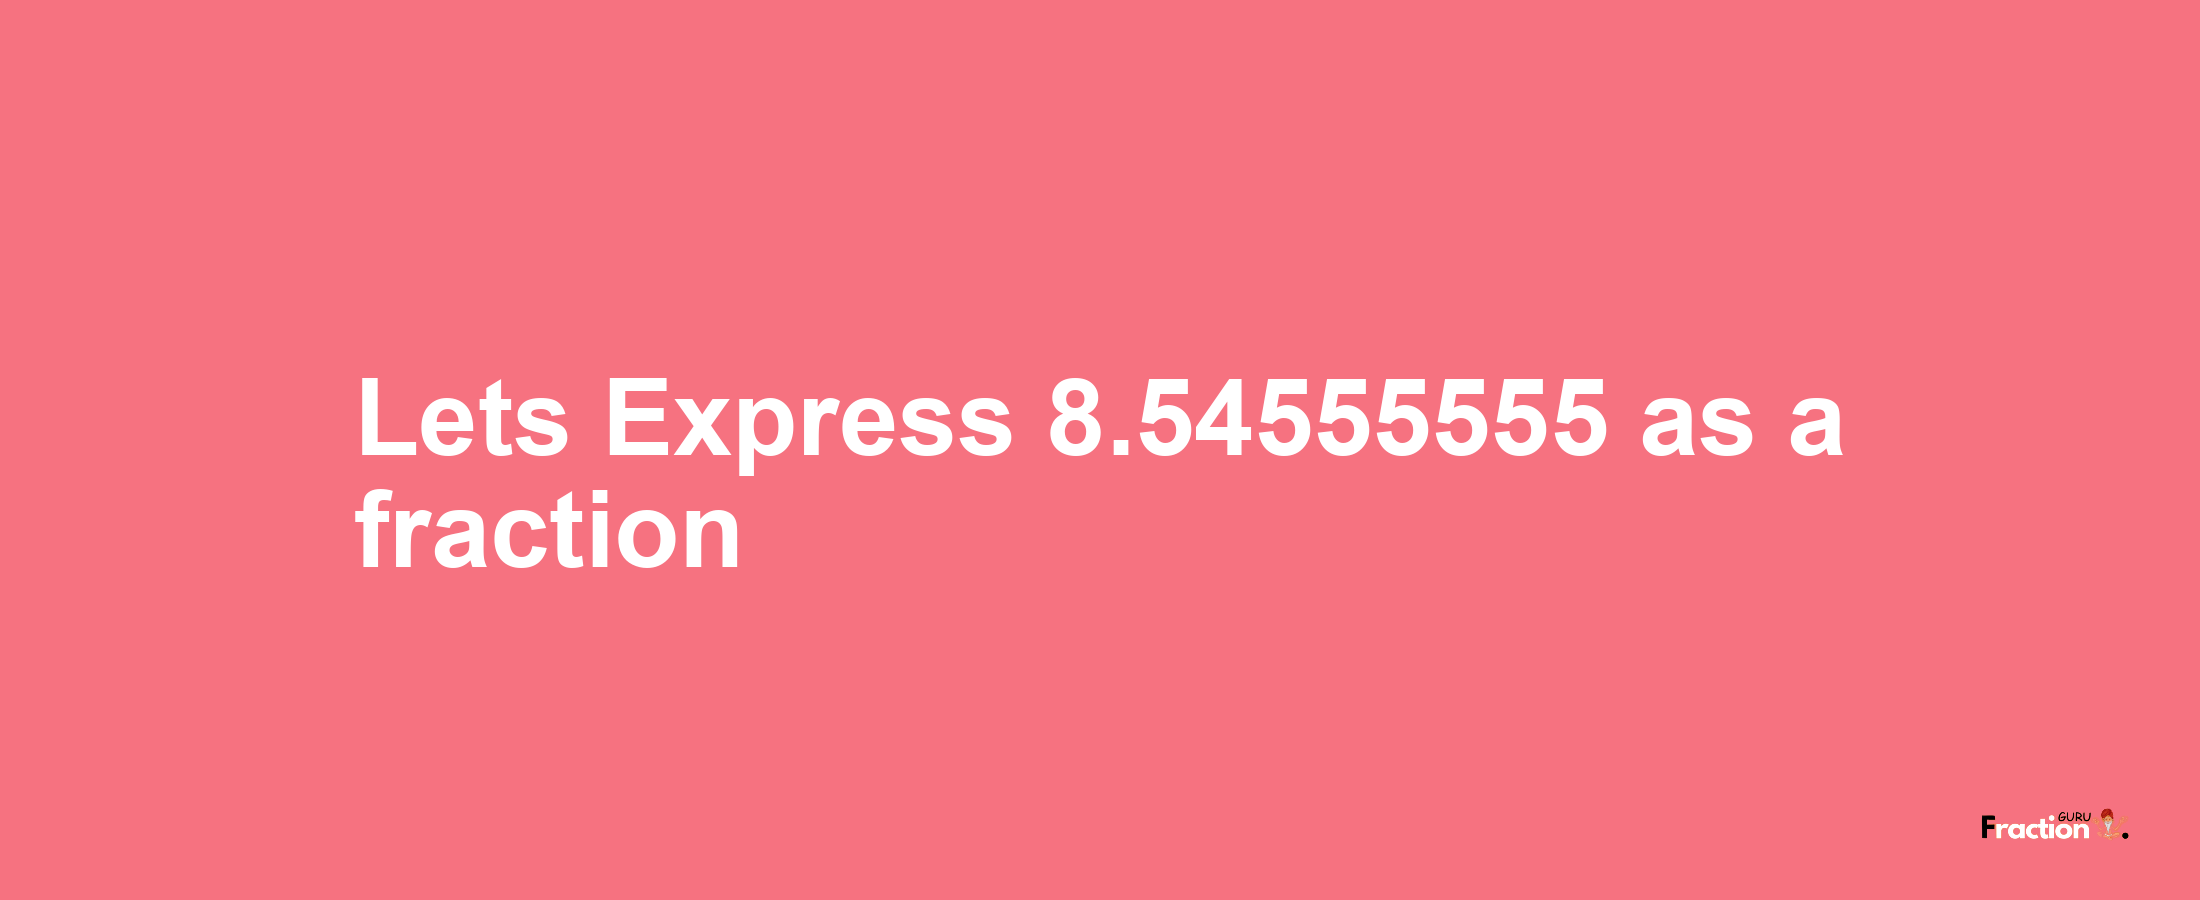 Lets Express 8.54555555 as afraction